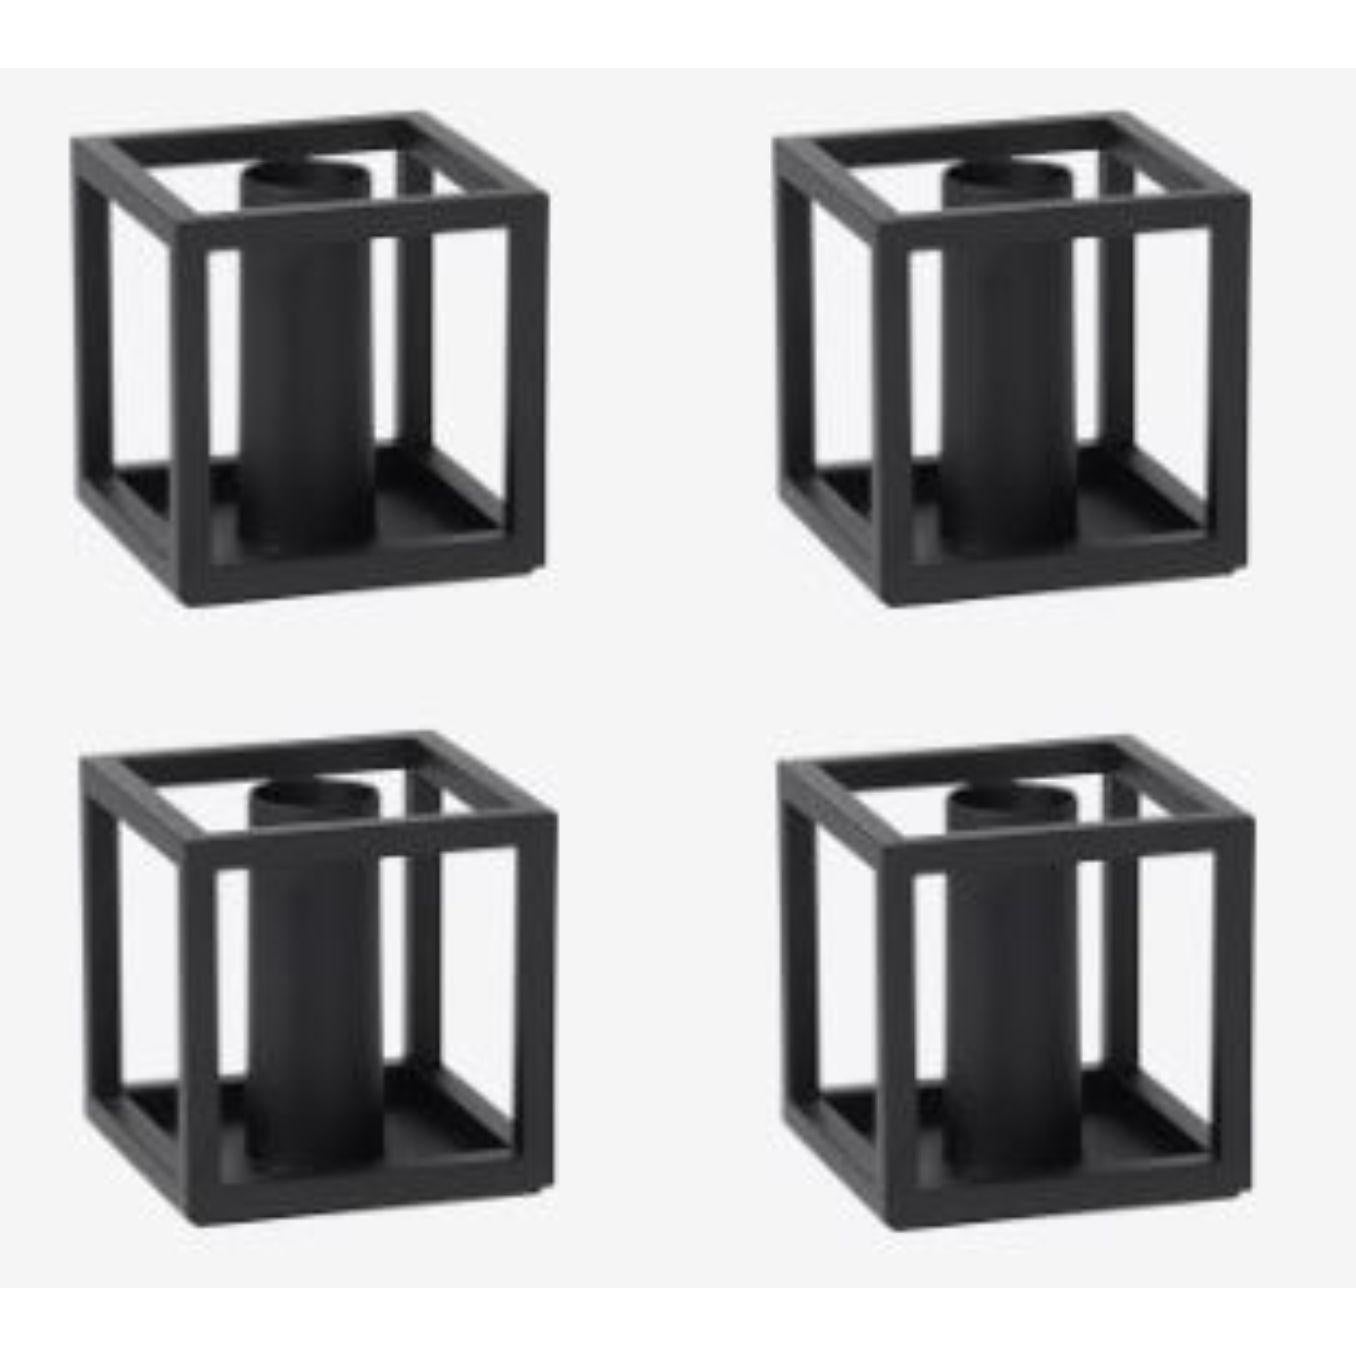 Set of 4 black Kubus 1 candle holders by Lassen
Dimensions: D 7 x W 7 x H 7 cm 
Materials: metal 
Also available in different dimensions.
Weight: 0.40 Kg

A new small wonder has seen the light of day. Kubus Micro is a stylish, smaller version